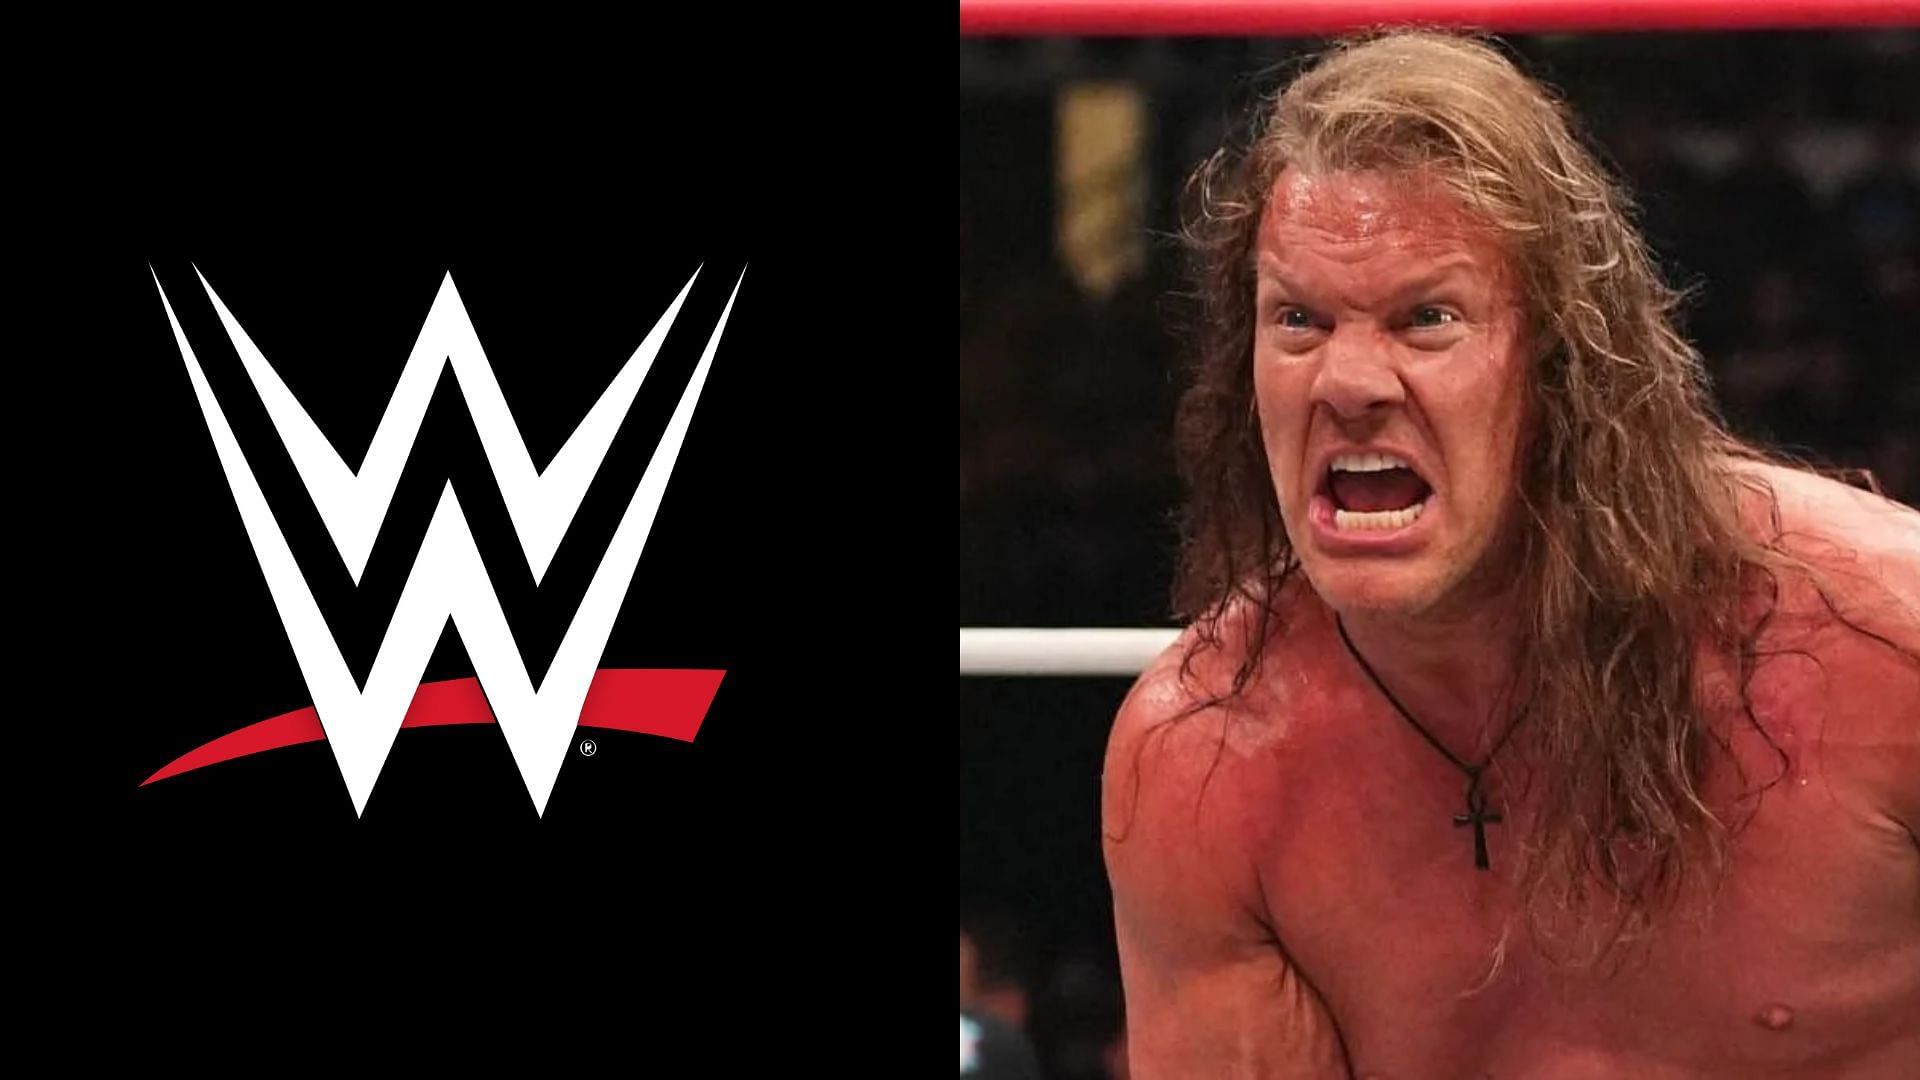 Chris Jericho has been in the wrestling business for almost 3 decades